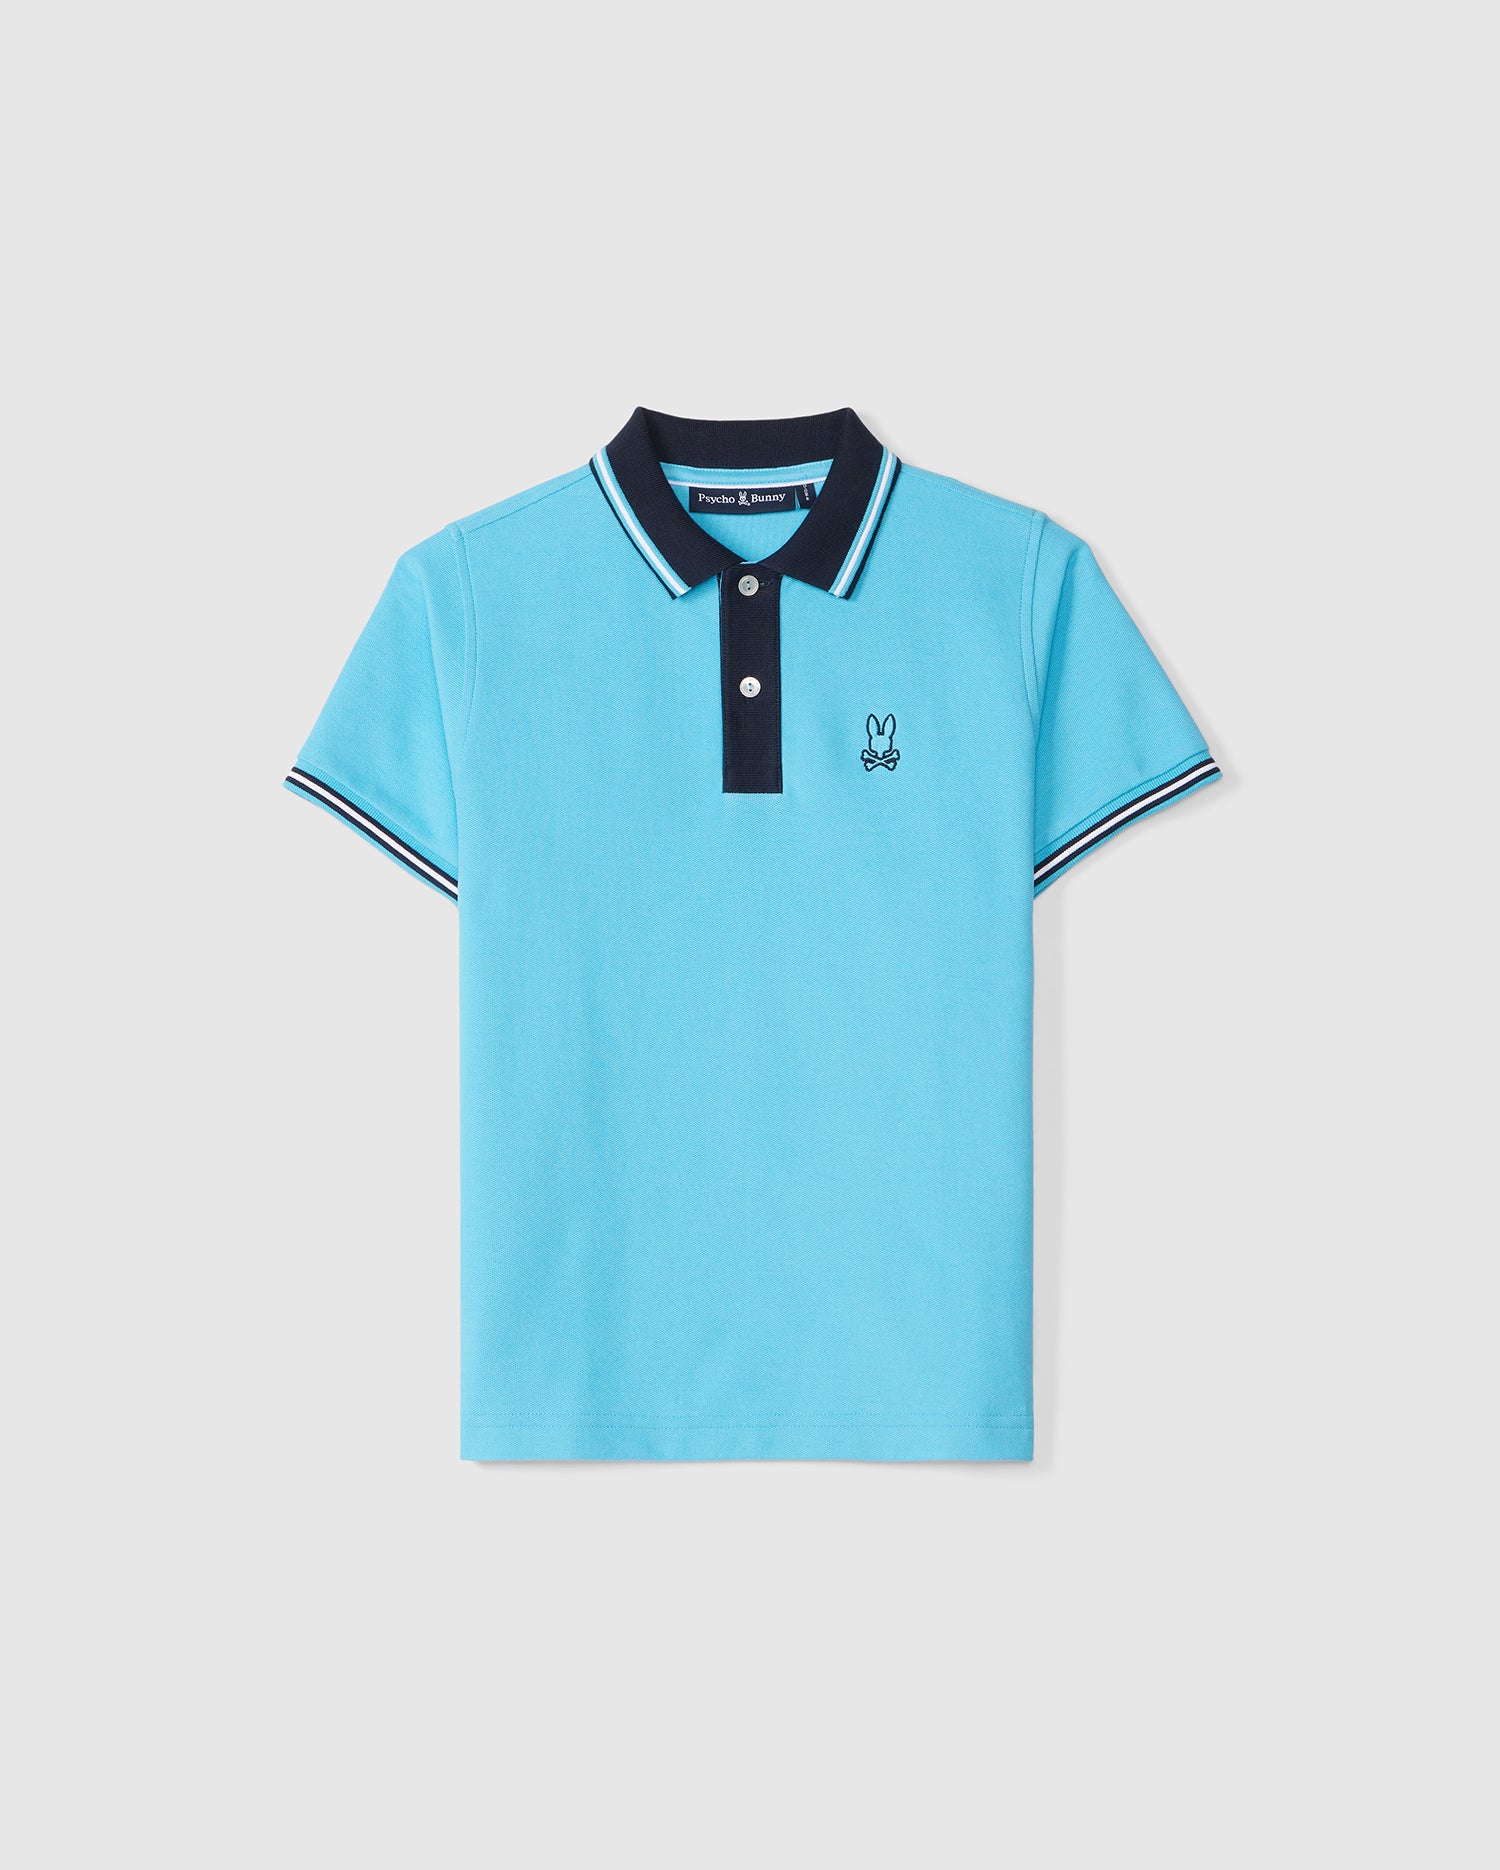 The Psycho Bunny KIDS SALINA PIQUE POLO SHIRT - B0K379B200 is a bright blue option with short sleeves, perfect for casual to dressy occasions. It features a black collar with white stripes, a black button placket with two buttons, and a small black embroidered cartoon bunny logo on the left chest. The sleeve hems have matching black and white stripes.